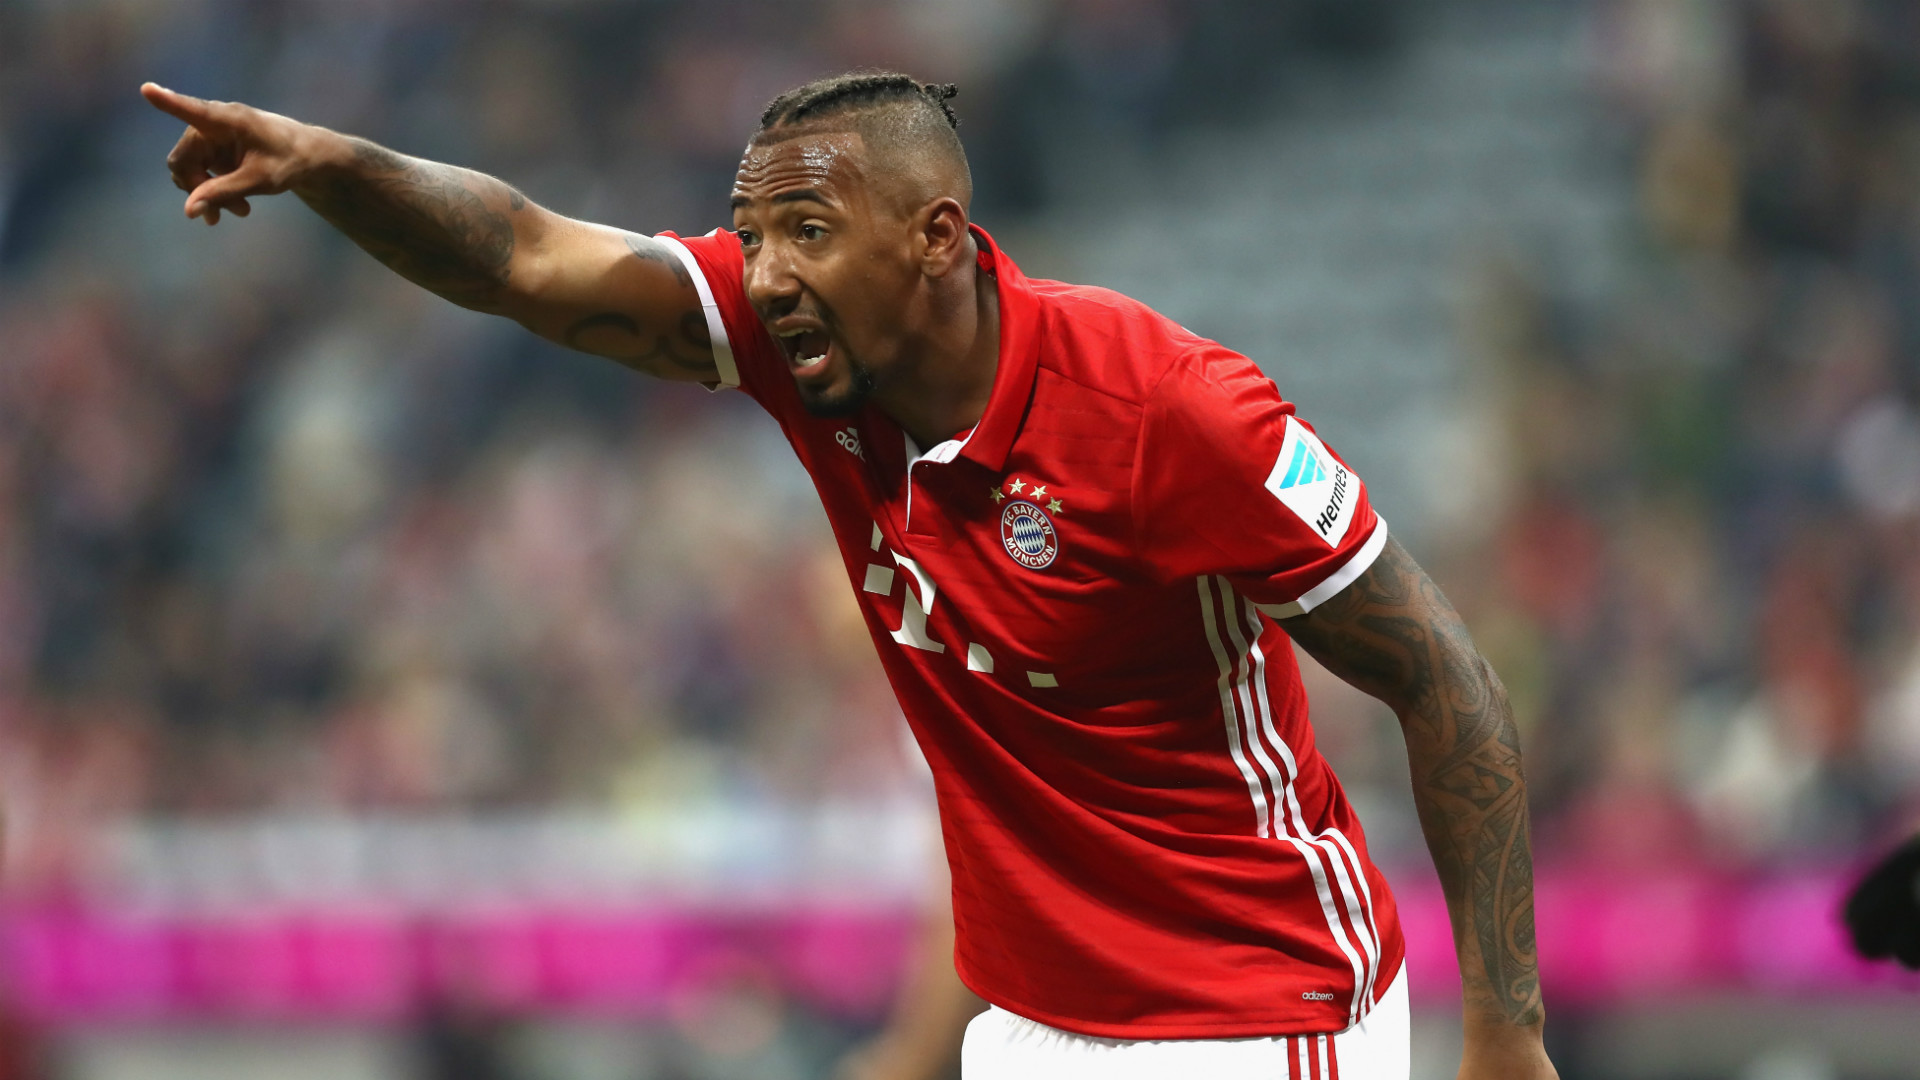 CHELSEA MOVE FOR BOATENG Hd-jerome-boateng_5ibyqig31chl1dqaftx08it2t